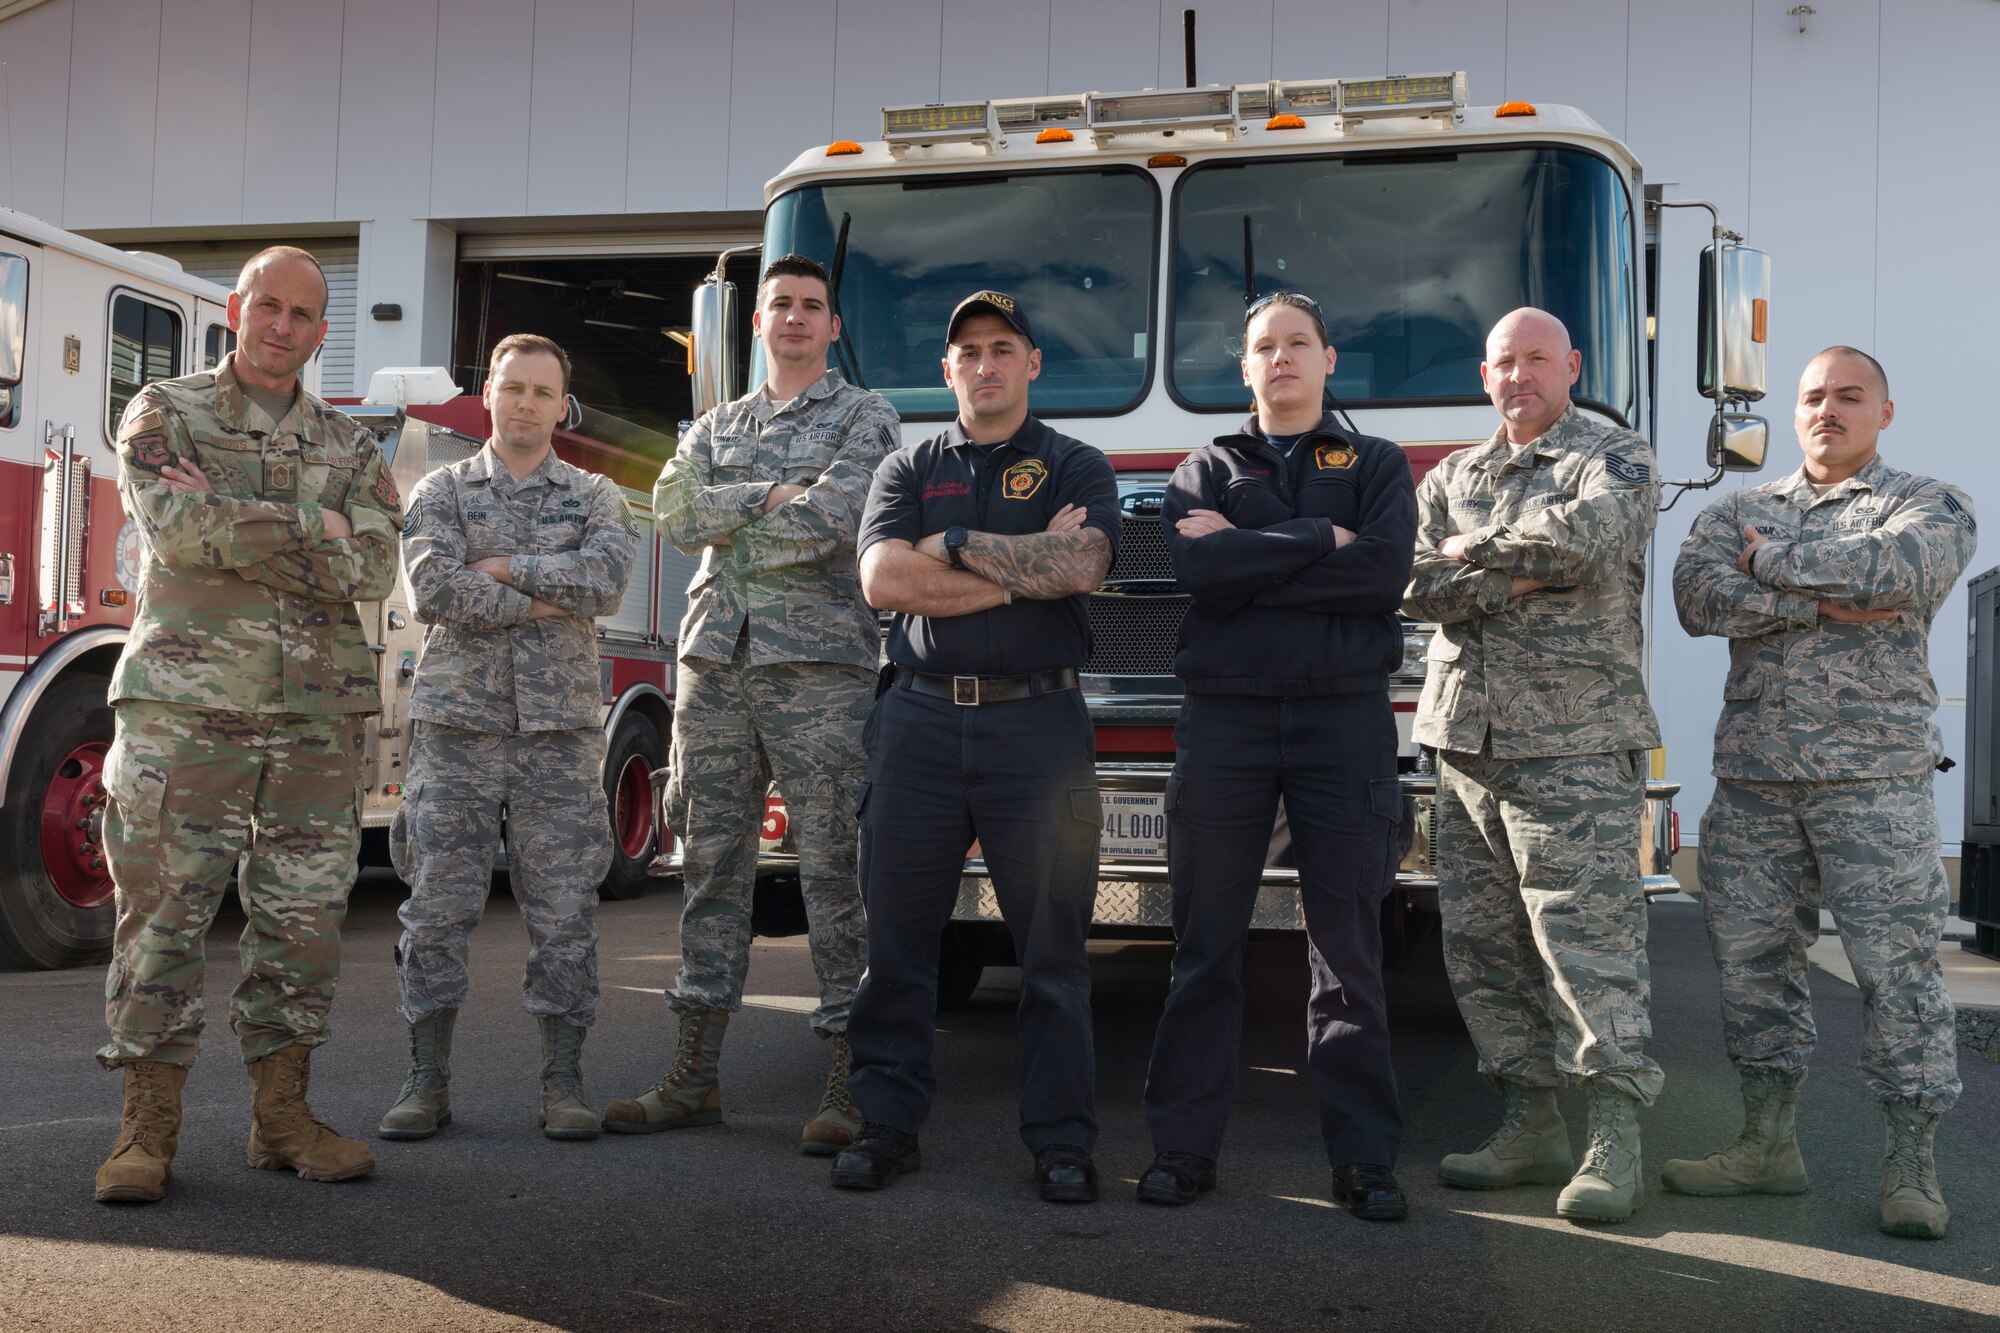 (From left to right) Chief Master Sgt. Robert Cross, Tech. Sgt. Craig Bein, Senior Airman Jason Conway, Firefighter Howard Corp, Firefighter Lisa Deakins, Tech. Sgt Ronald Avery, and Senior Airman Gabriel Pagan pose in front of the Bradley Air National Guard Base Fire Station Nov. 3, 2019 East Granby, Conn. These firefighters all responded to the B-17 Flying Fortress crash at Bradley International Airport Oct. 2, 2019. (U.S. Air National Guard photo by Airman 1st Class Chanhda Ly)